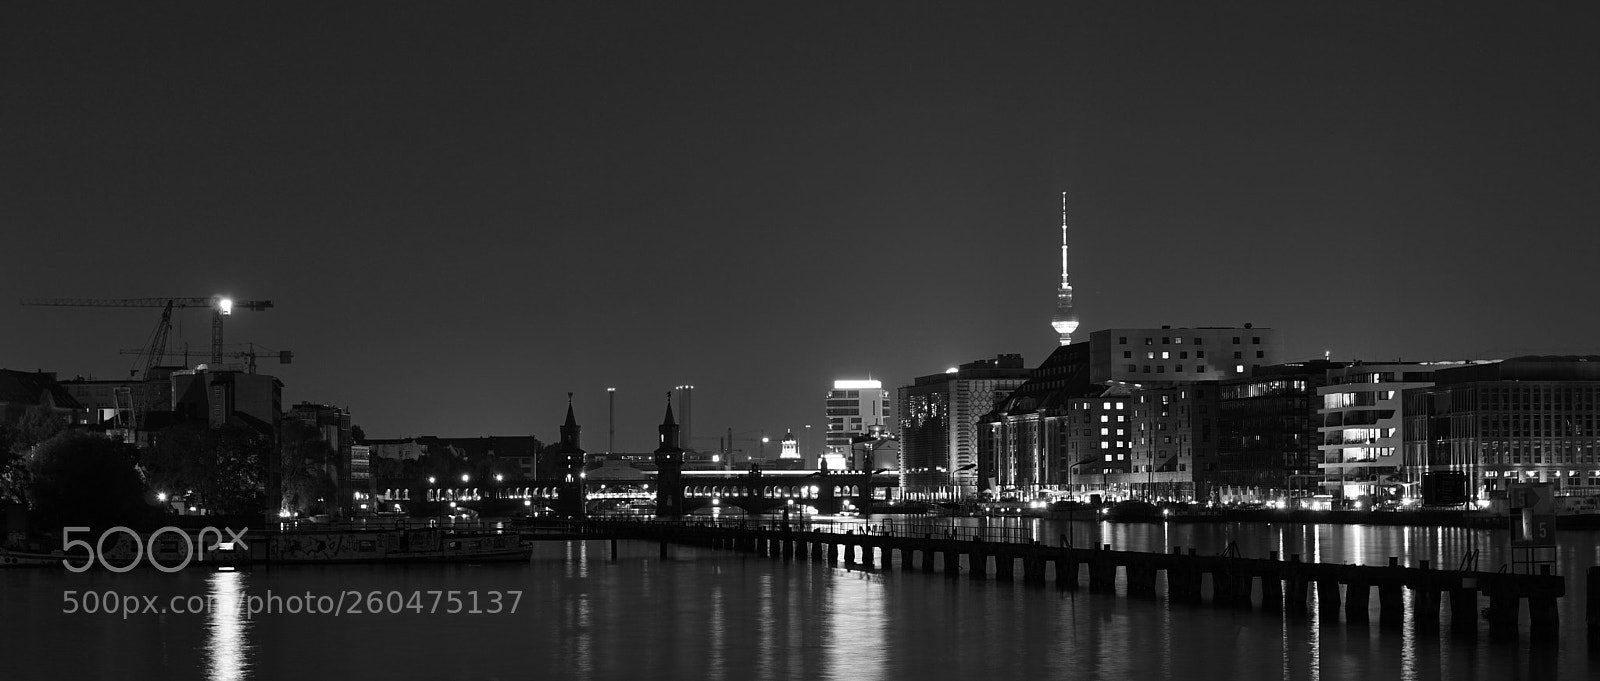 Sony a6000 sample photo. Berlin cityscape warchauer br photography